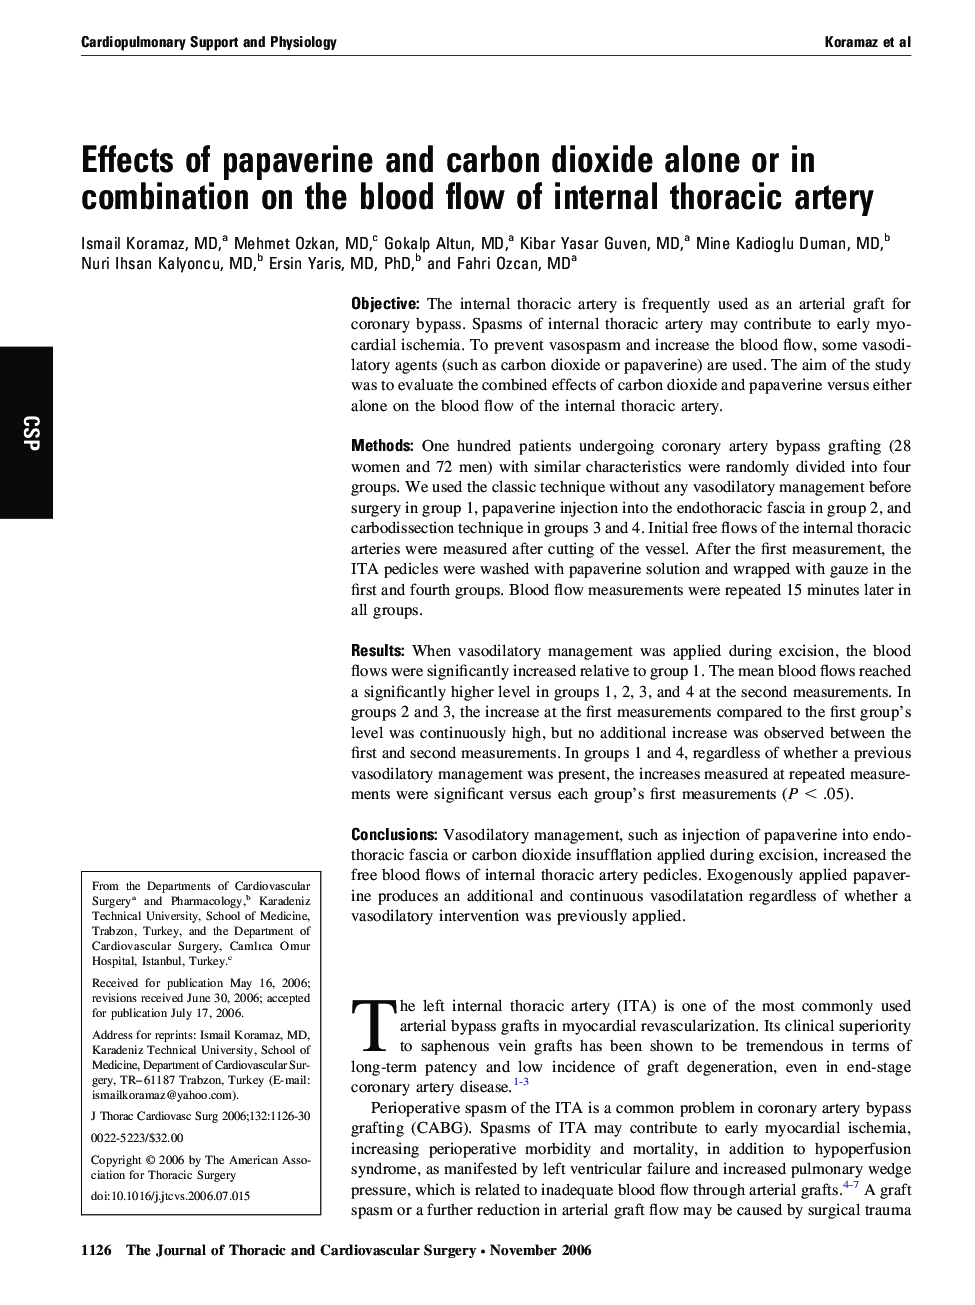 Effects of papaverine and carbon dioxide alone or in combination on the blood flow of internal thoracic artery